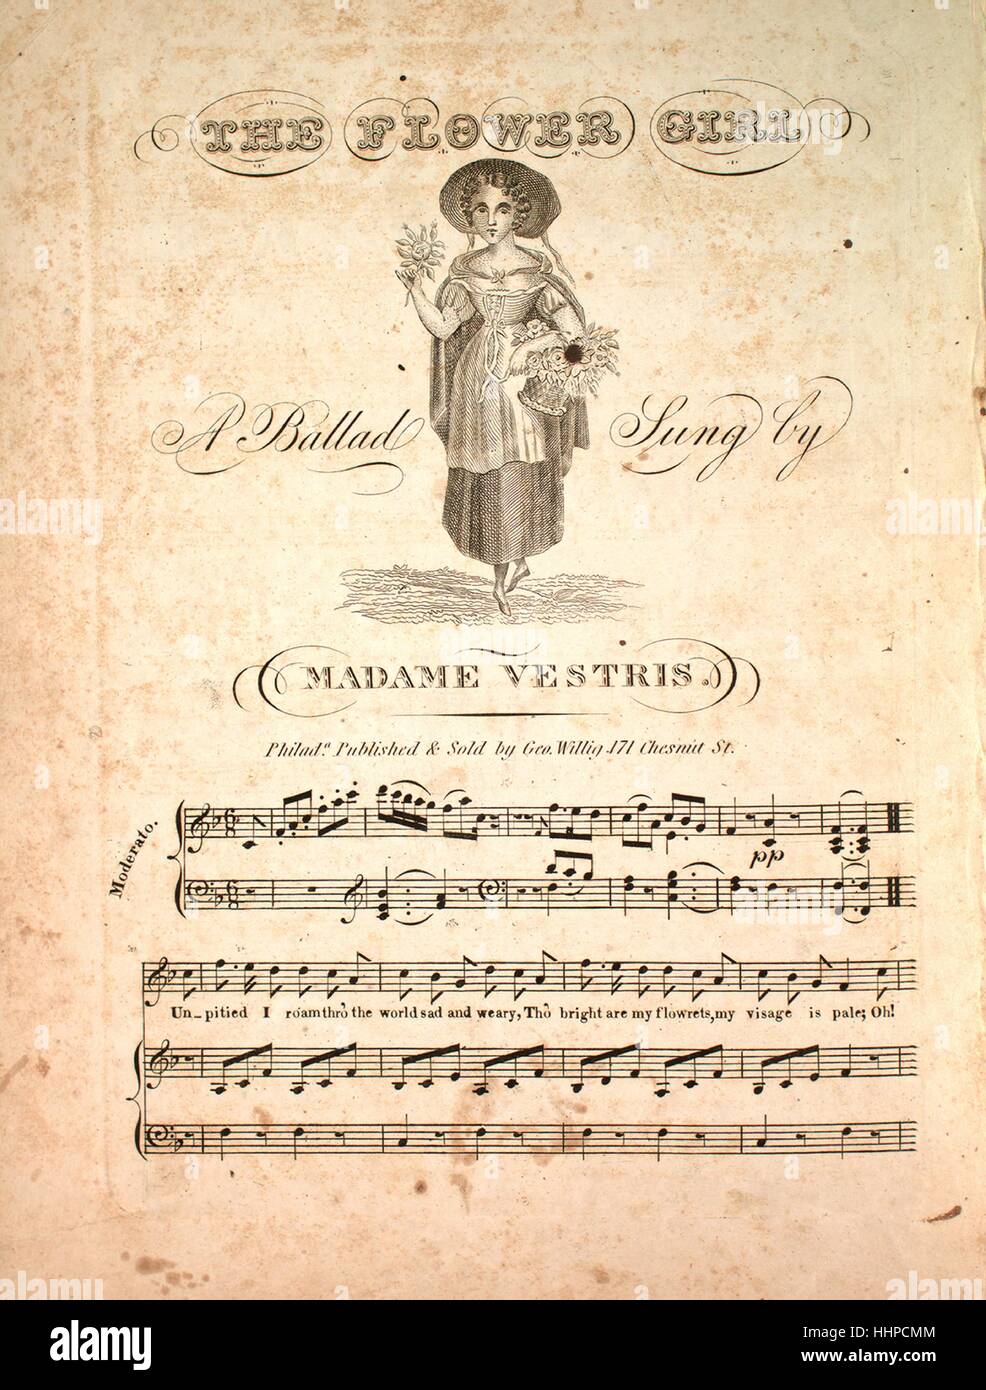 Sheet music cover image of the song 'The Flower Girl A Ballad', with original authorship notes reading 'na', United States, 1900. The publisher is listed as 'Geo. Willig, 171 Chesnut St.', the form of composition is 'strophic', the instrumentation is 'piano and voice', the first line reads 'Unpitied I roam thro' the world sad and weary', and the illustration artist is listed as 'None'. Stock Photo